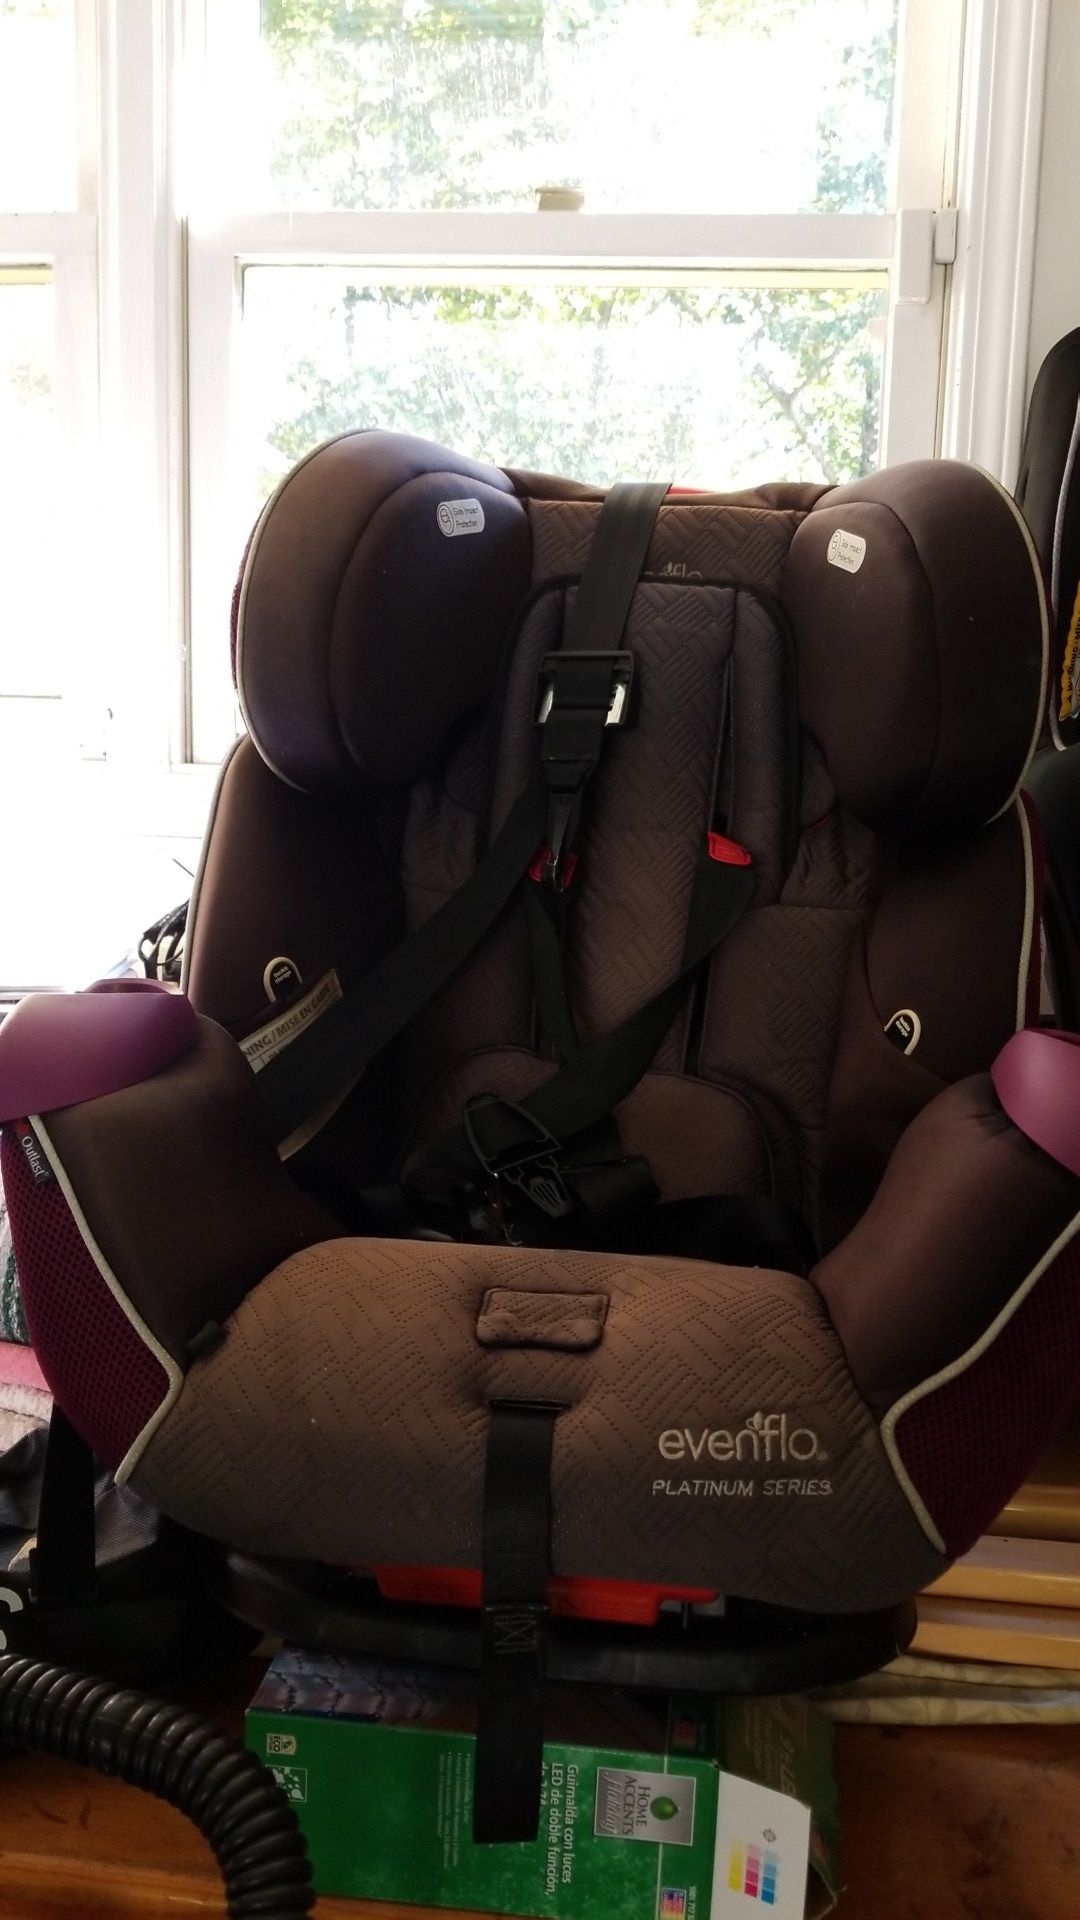 Used reclining car seat